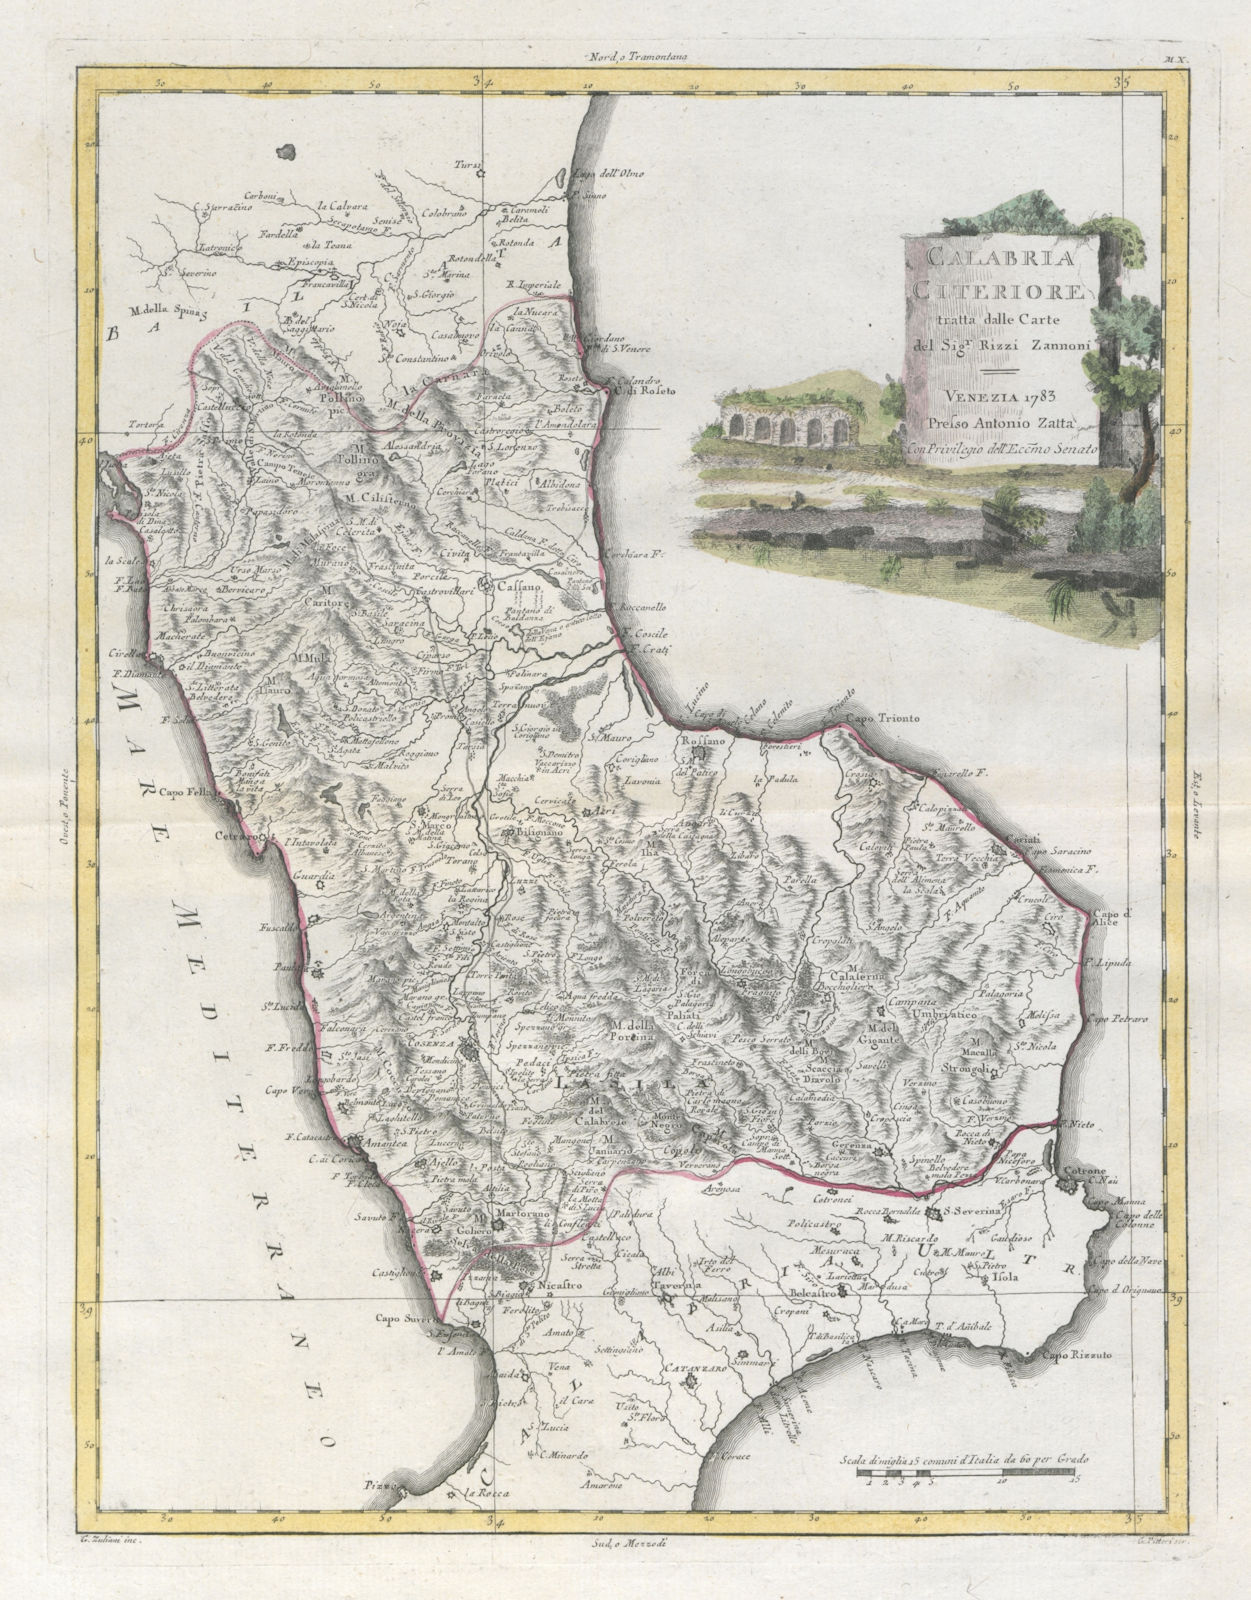 Associate Product "Calabria Citeriore…". Lower Calabria. ZATTA 1784 old antique map plan chart